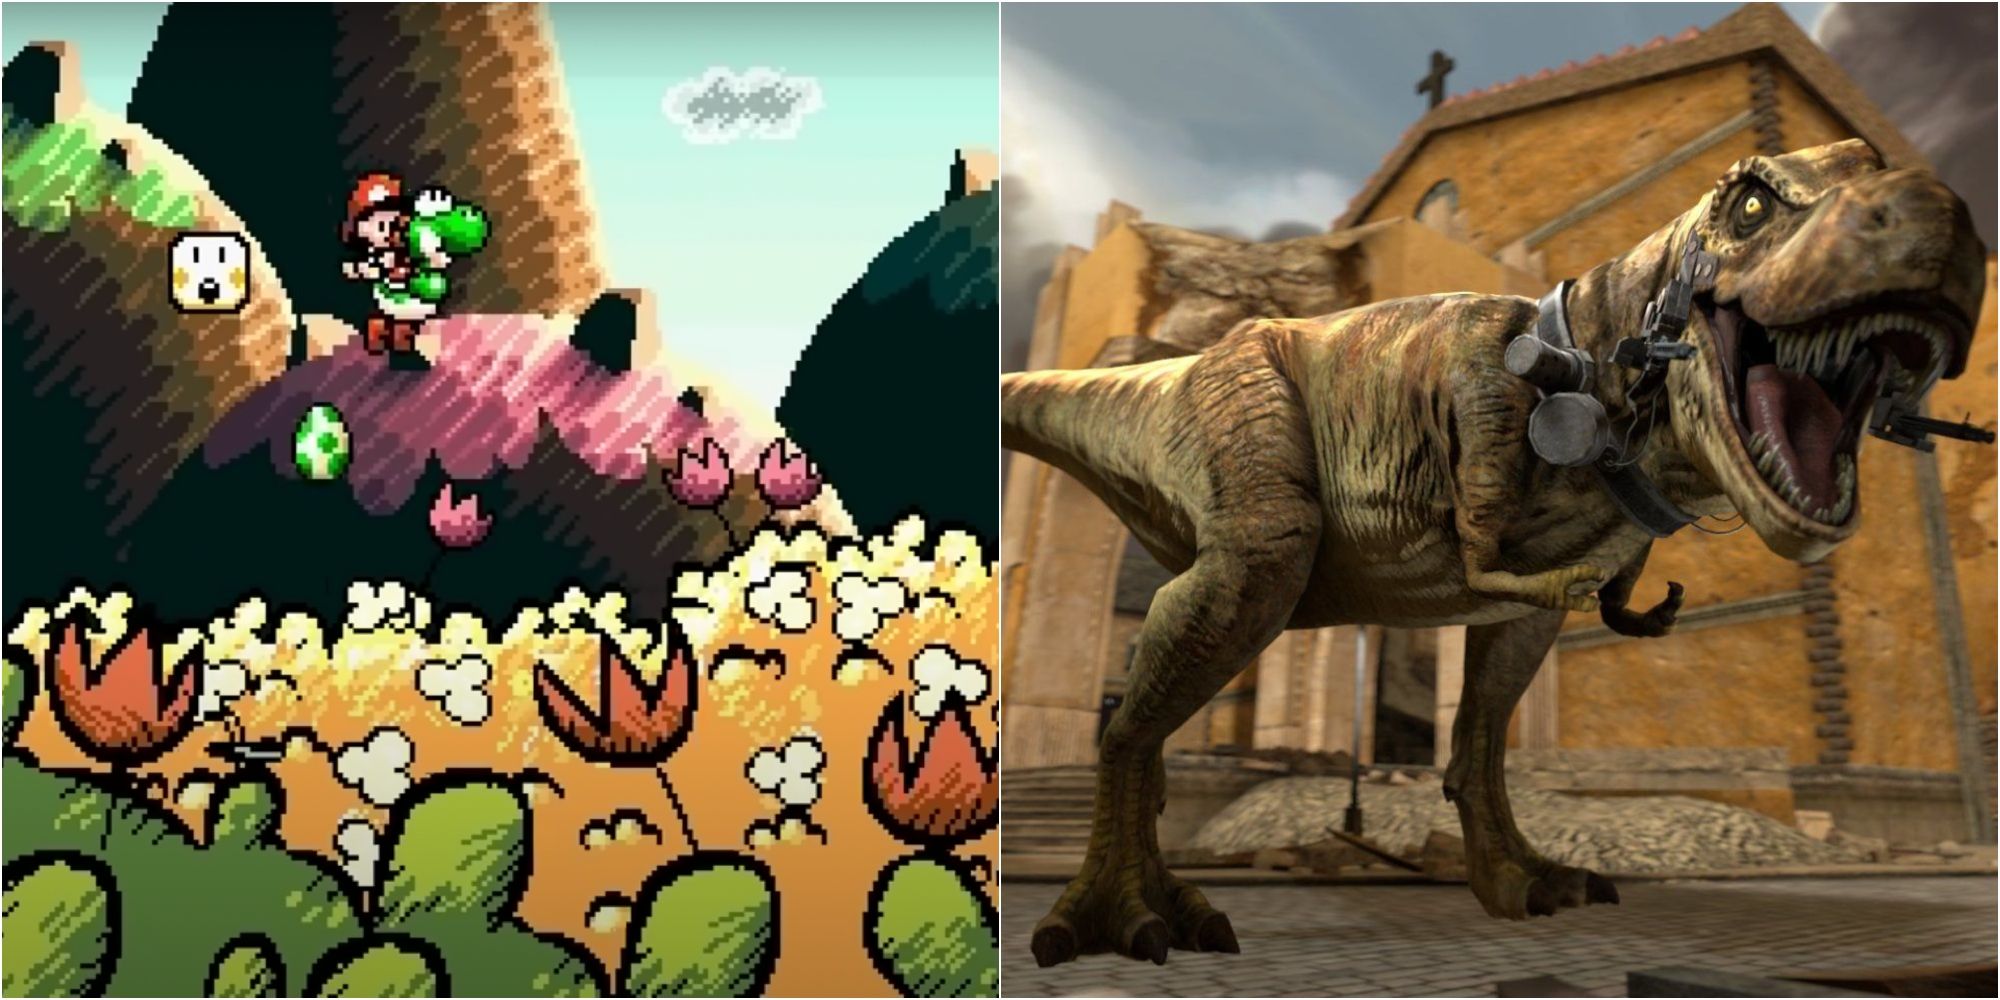 what are some of your favorite Dinosaur Video Games? : r/Dinosaurs